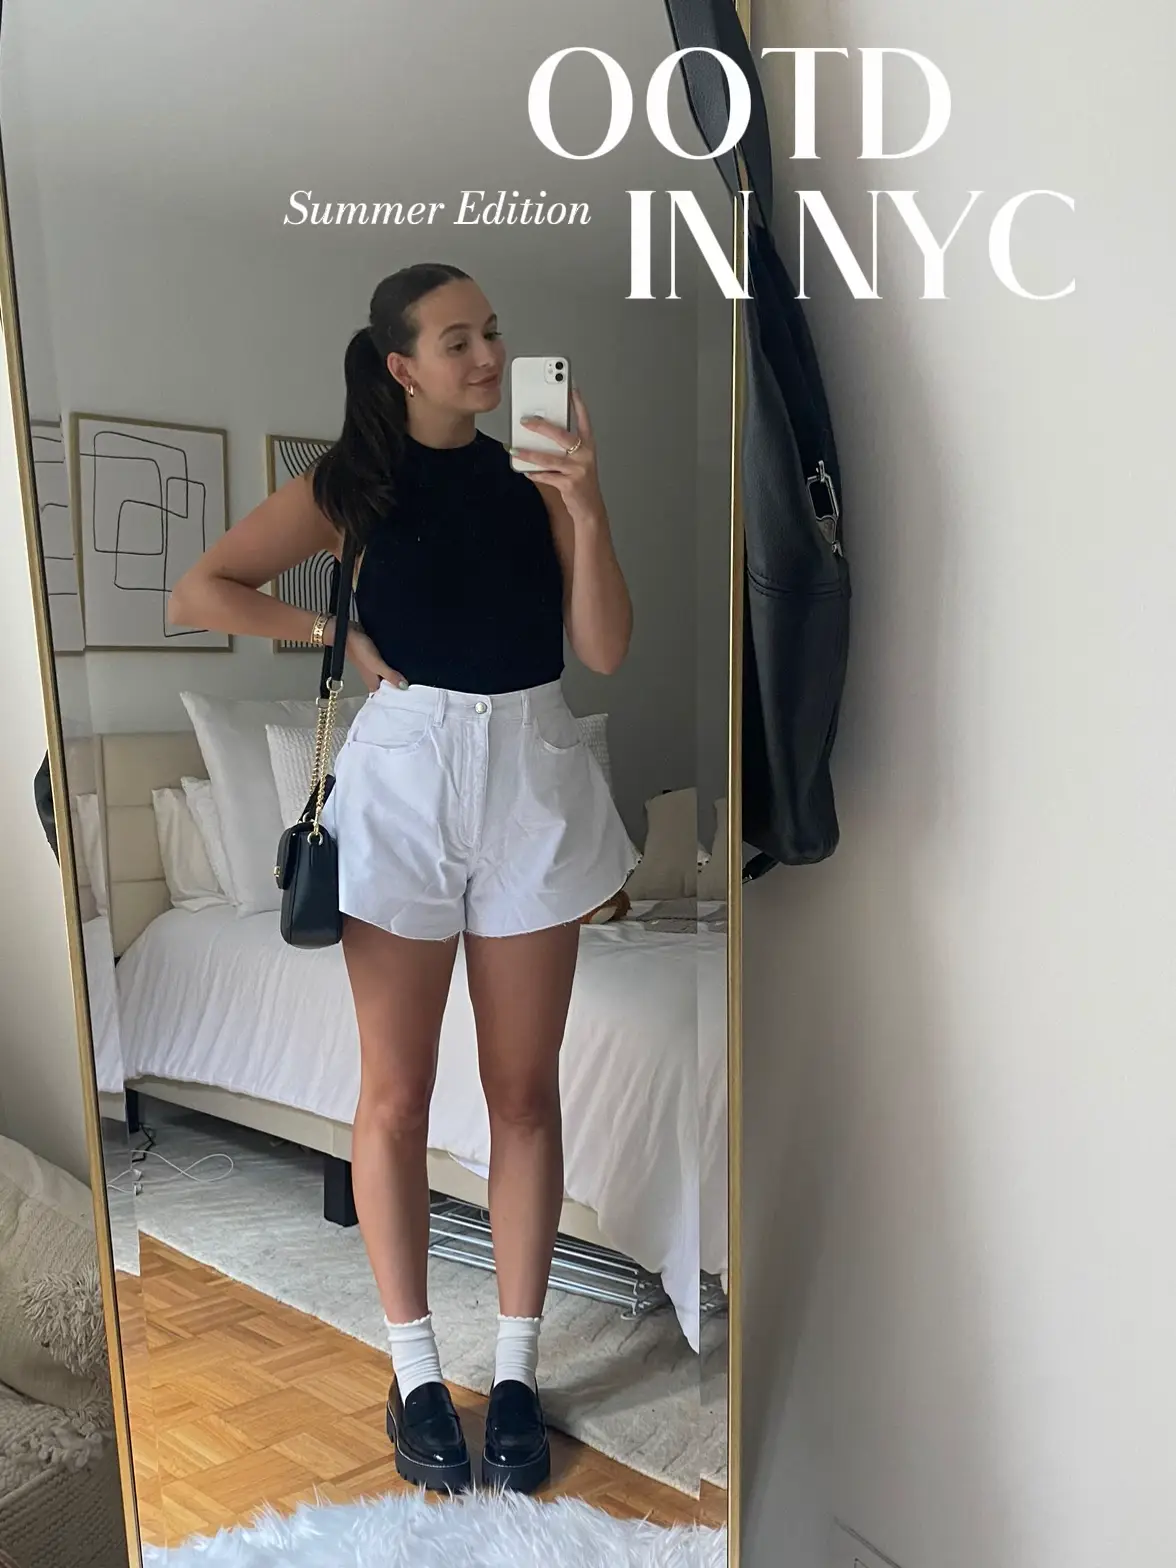 WHAT I WORE TO THE MET, Gallery posted by Sstephkoutss